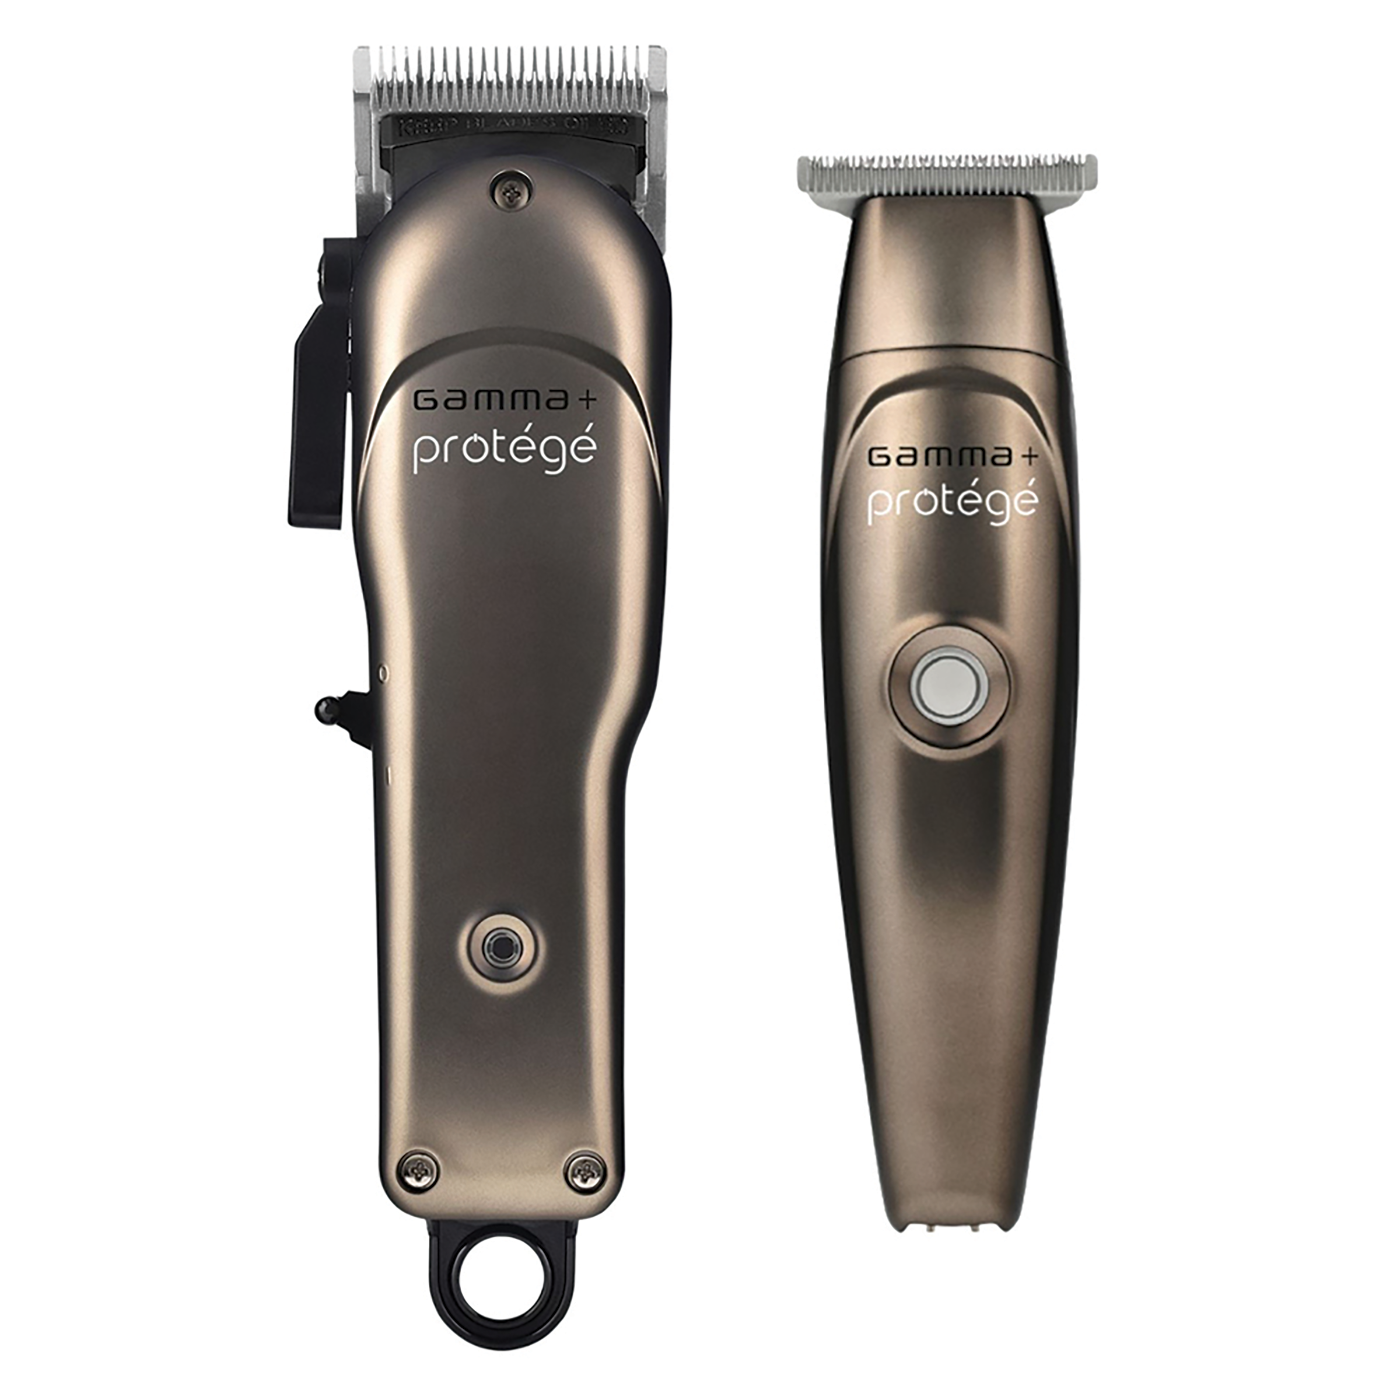 Protege Cordless Hair Clipper/Trimmer Combo